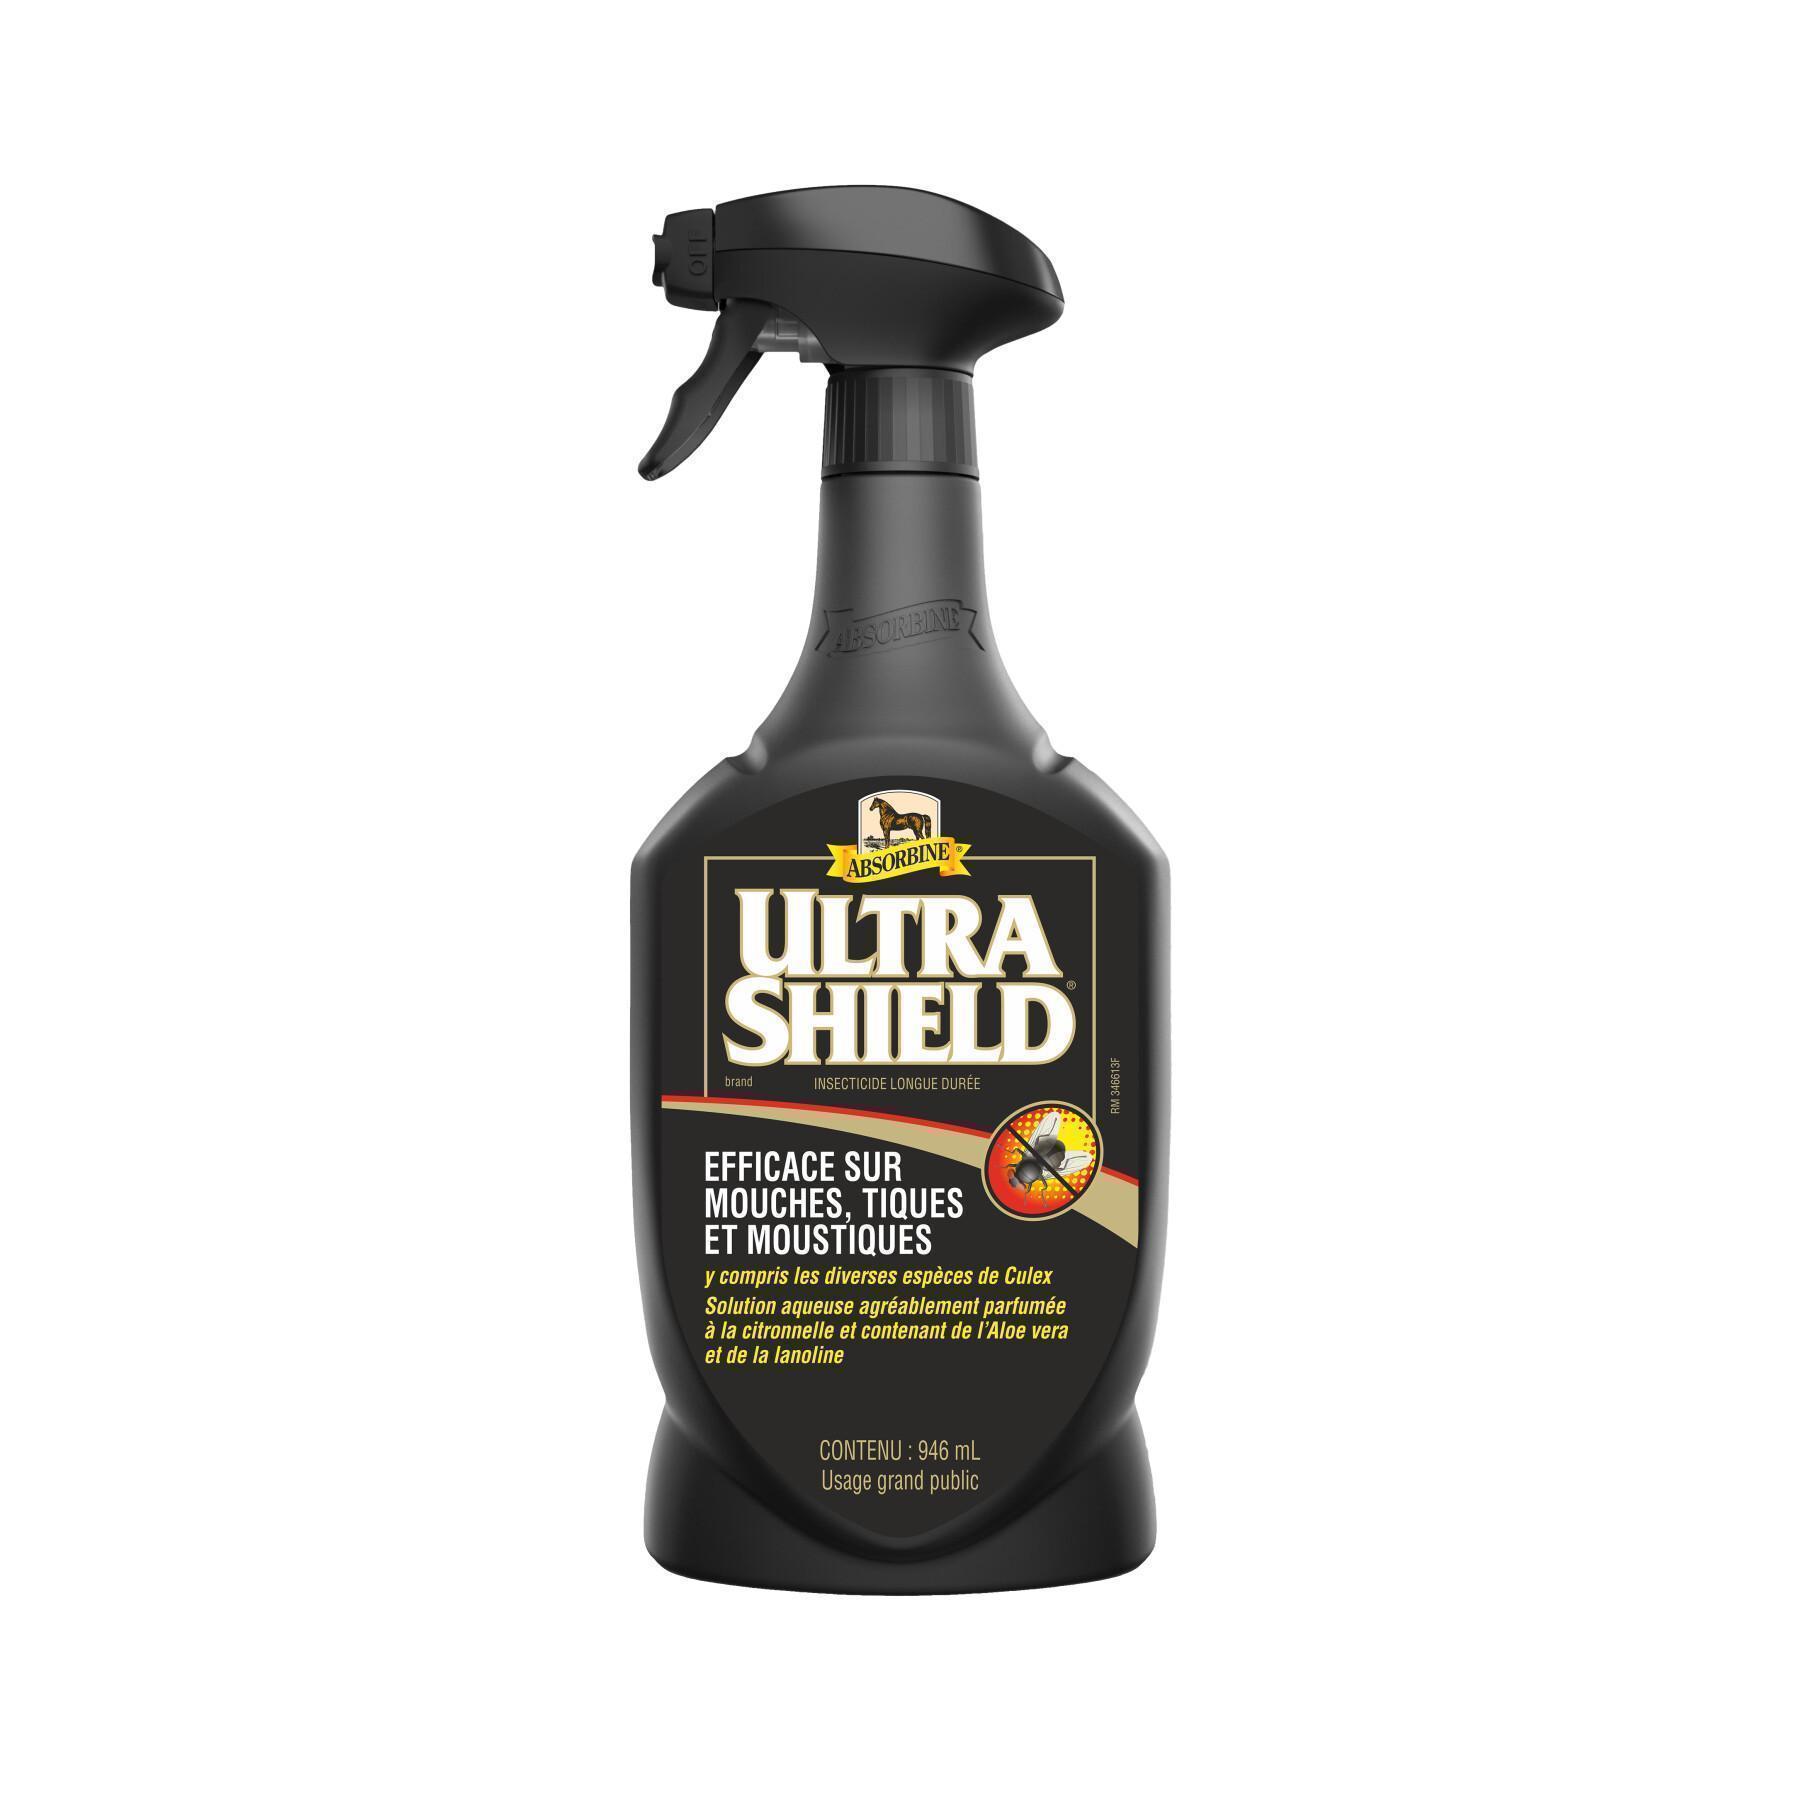 Anti-insect spray for horses Absorbine Ultrashiled